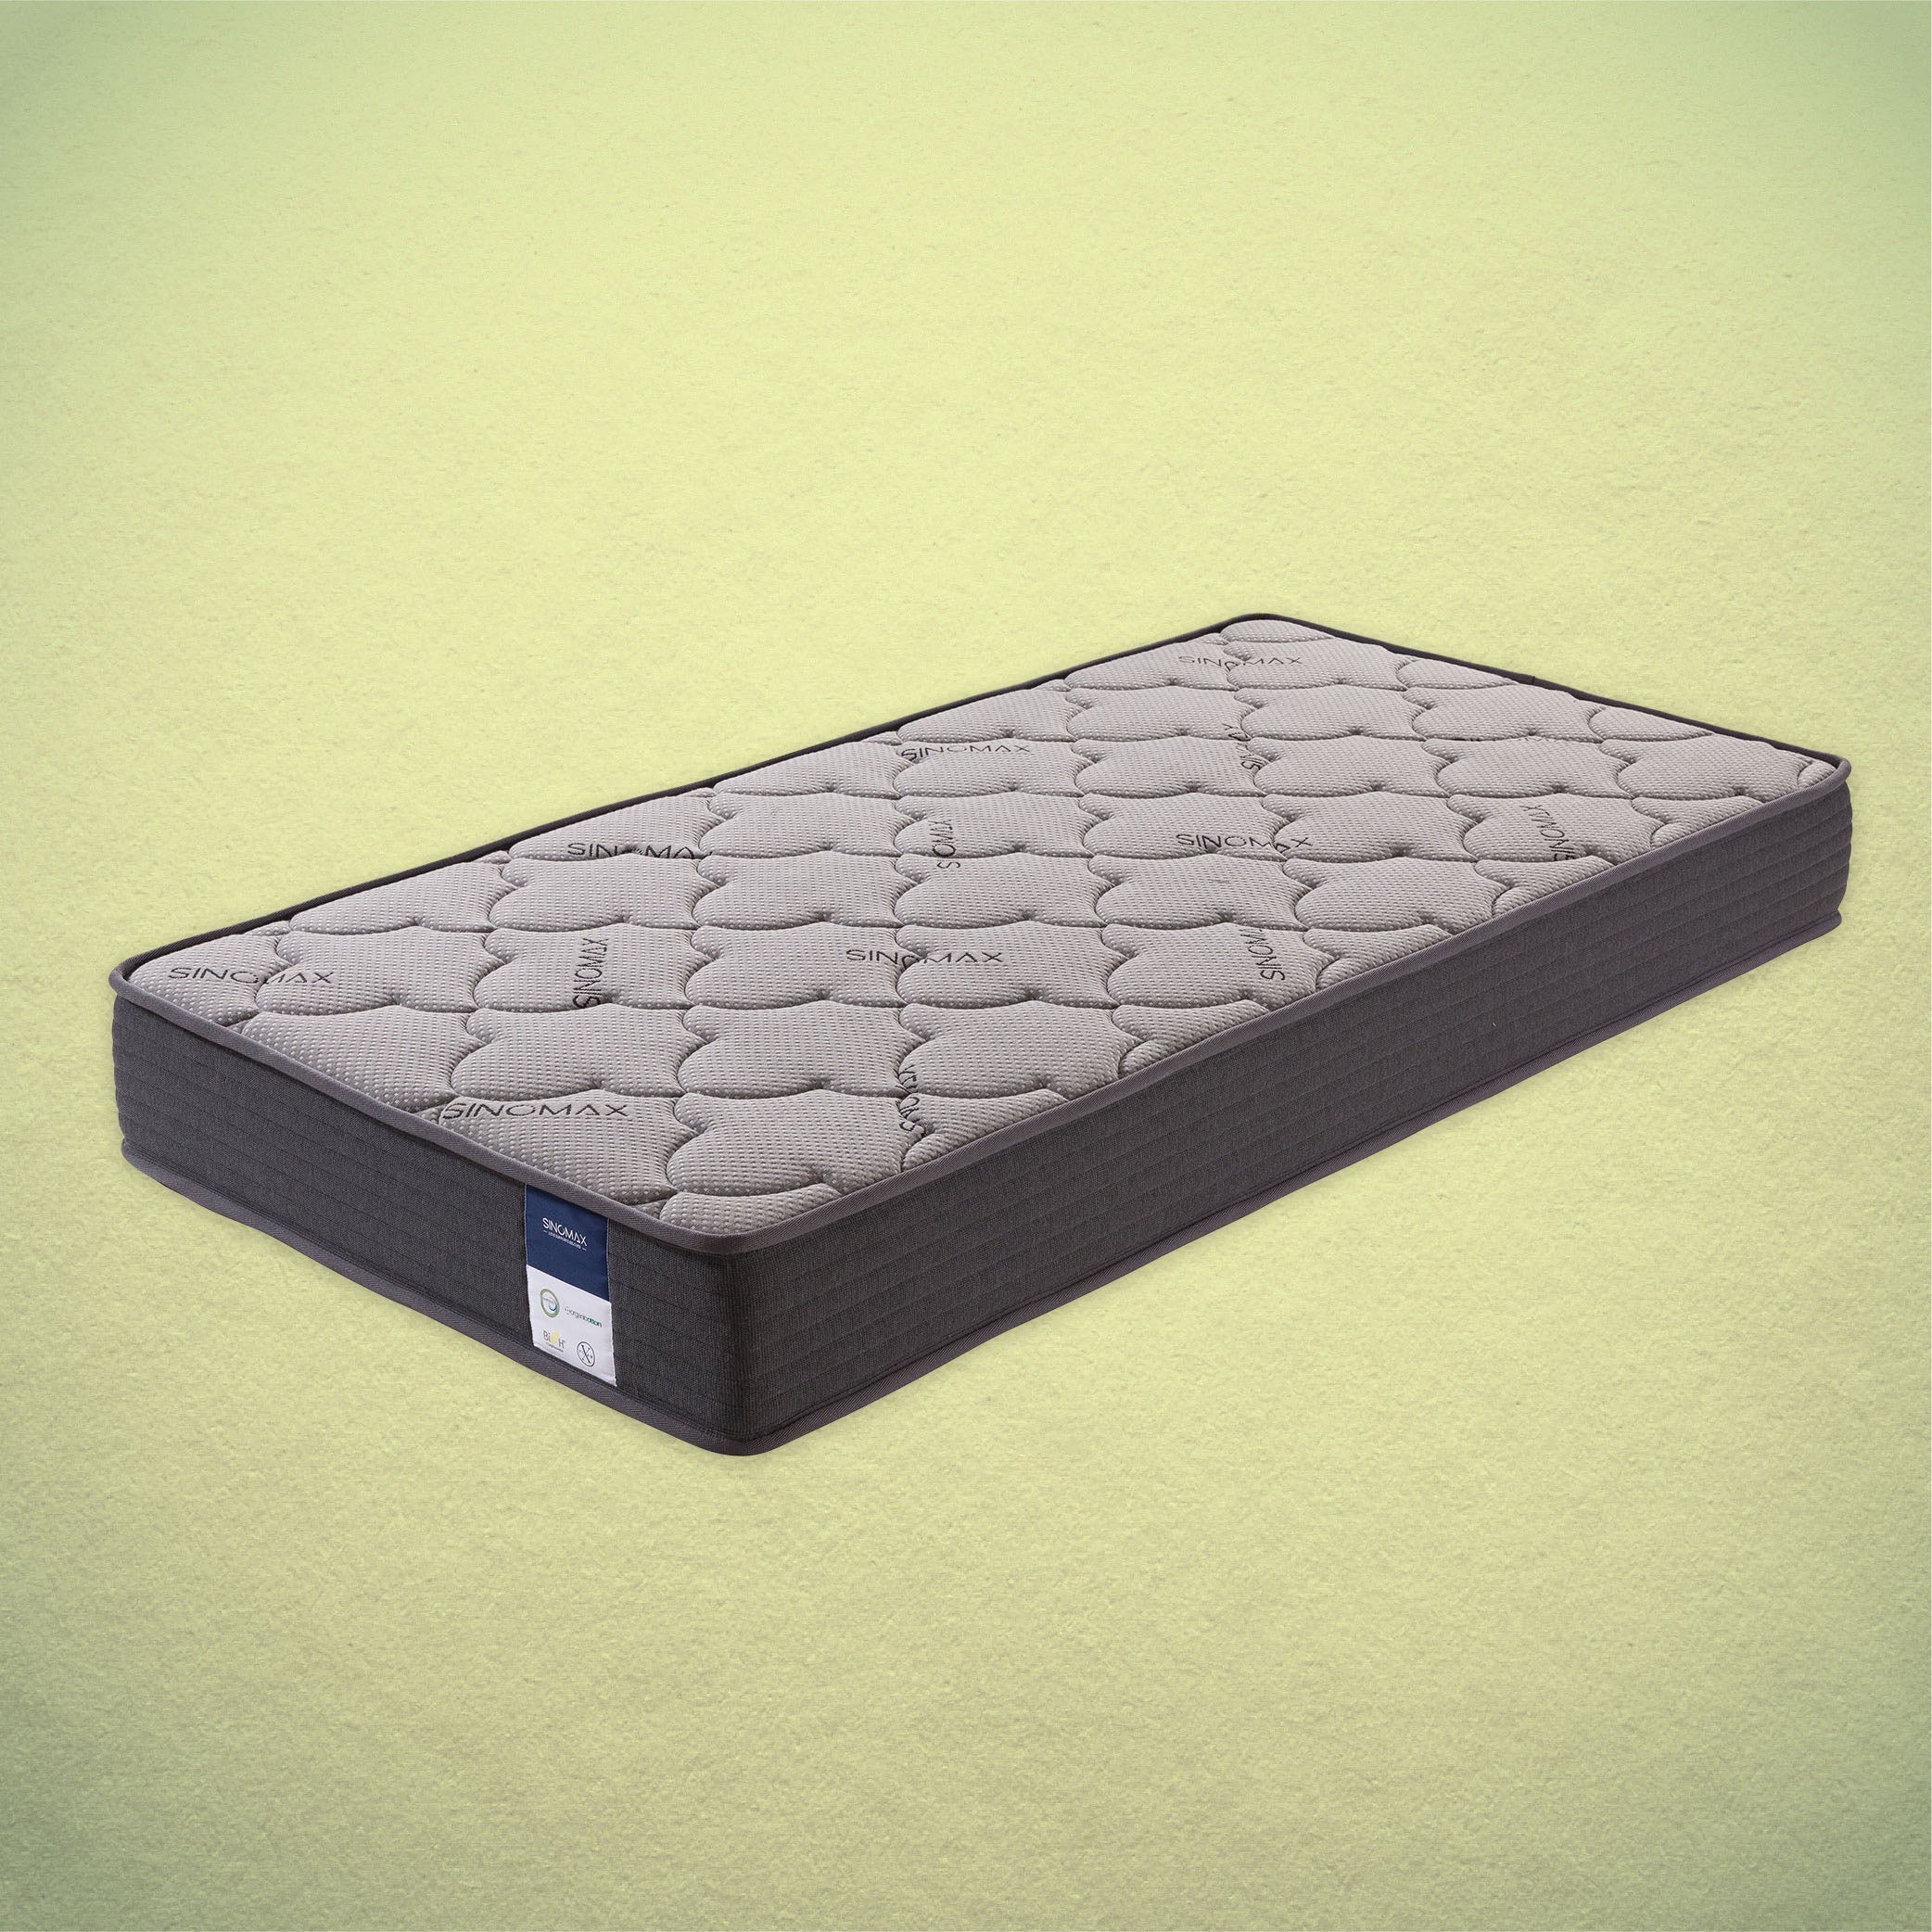 Anti-Bacterial Support Mattress - Tailor-made size (Above 48" W)